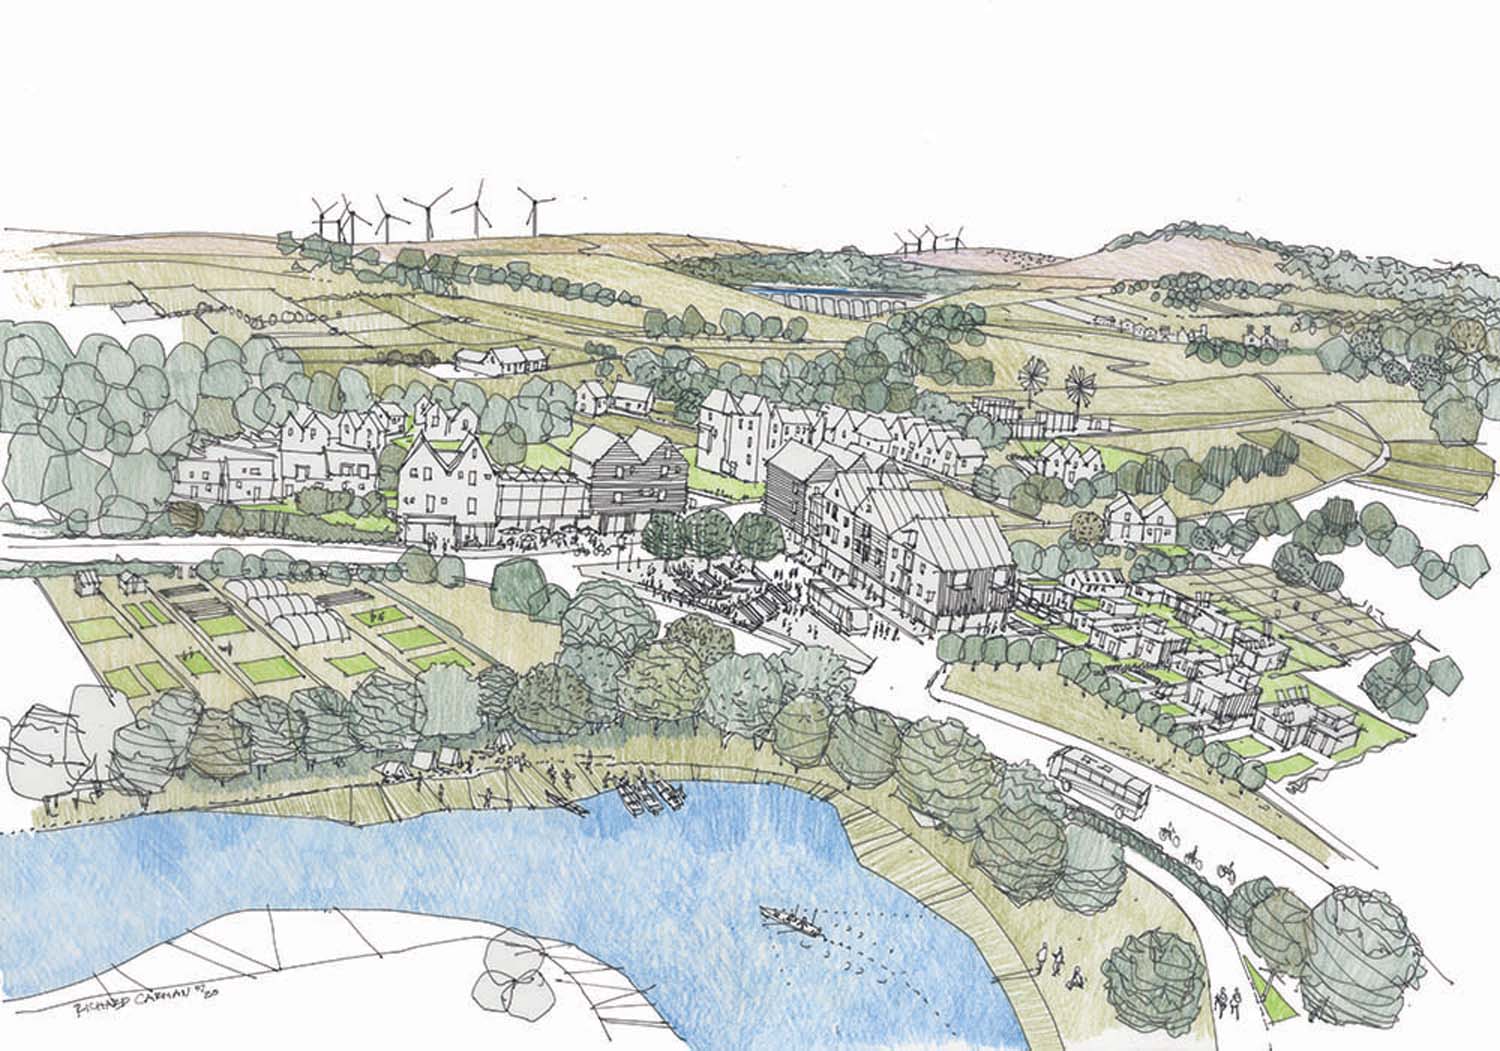 A pencil illustration birds-eye view of a rural community along a river, showing green fields, and a cluster of buildings.